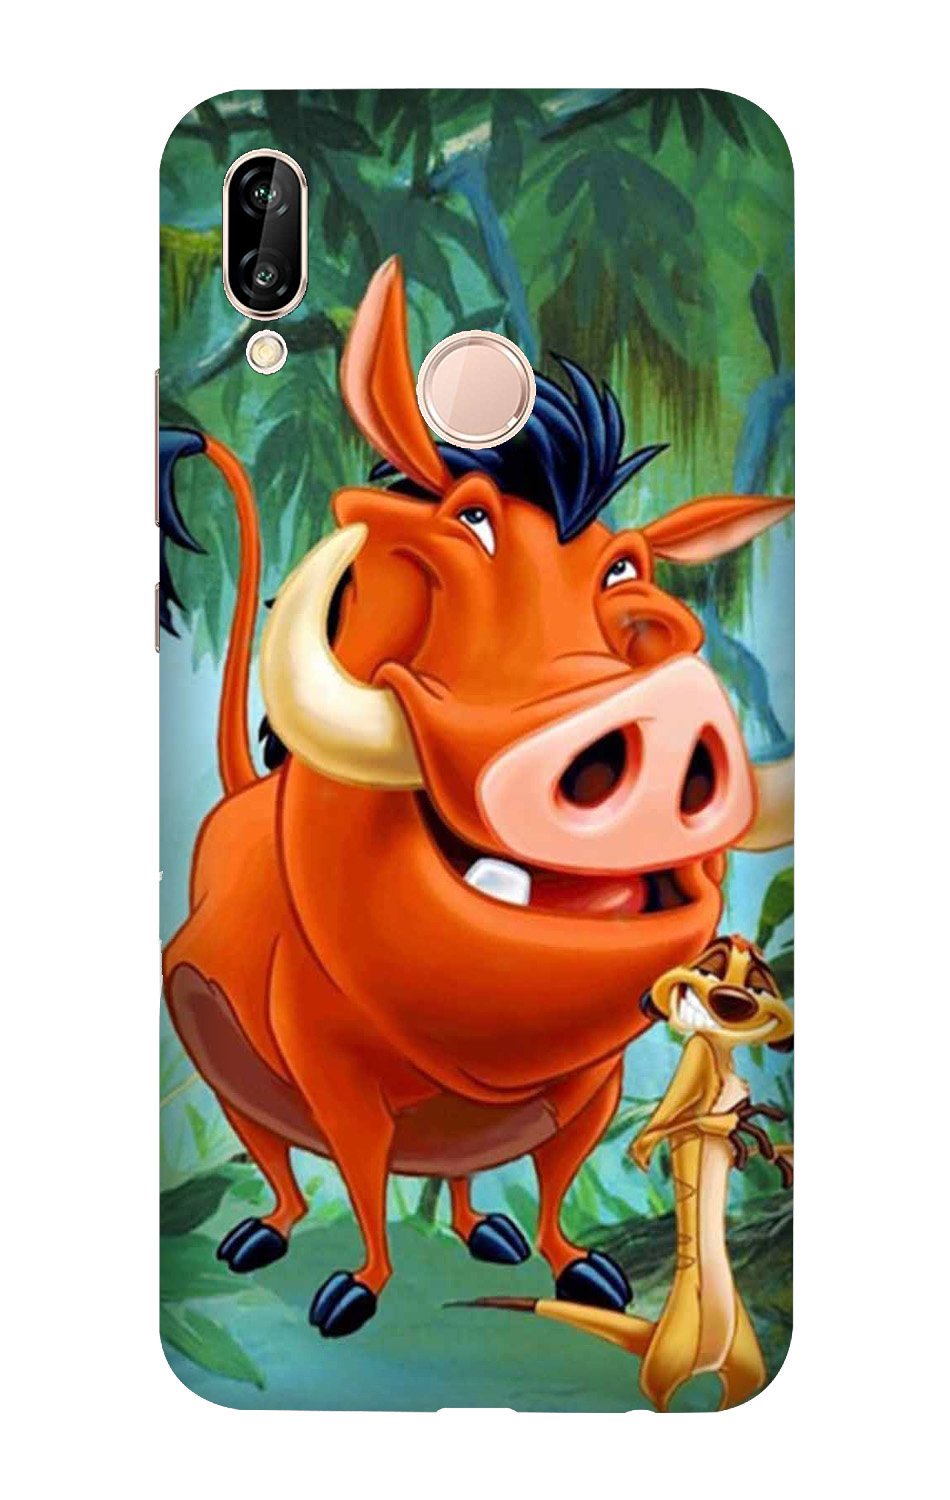 Timon and Pumbaa Mobile Back Case for Infinix Hot 7 Pro (Design - 305)